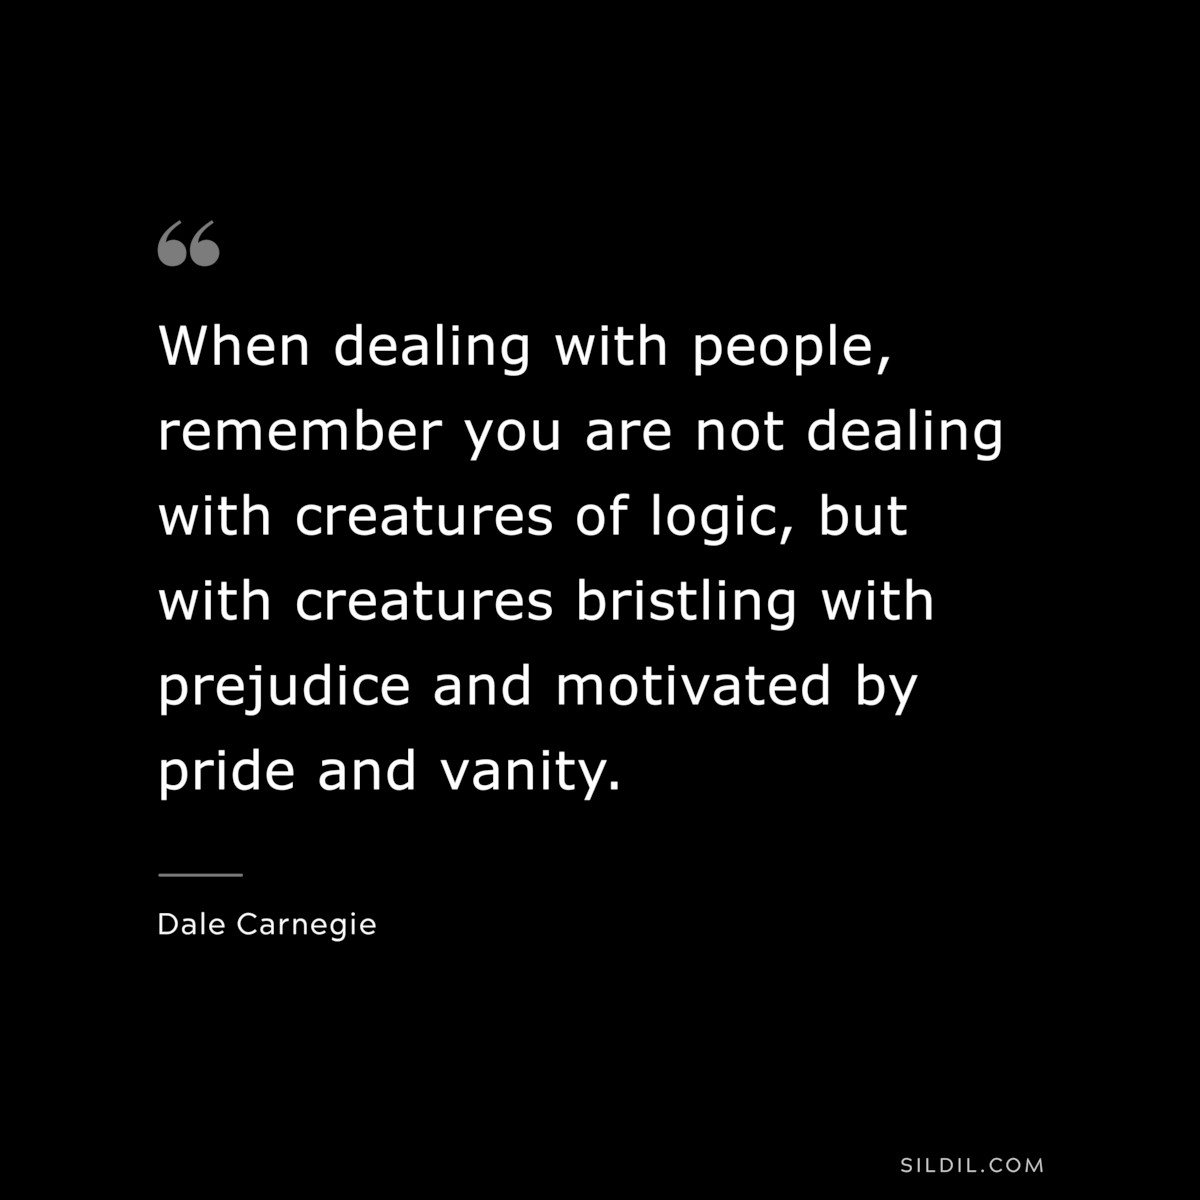 When dealing with people, remember you are not dealing with creatures of logic, but with creatures bristling with prejudice and motivated by pride and vanity.― Dale Carnegie